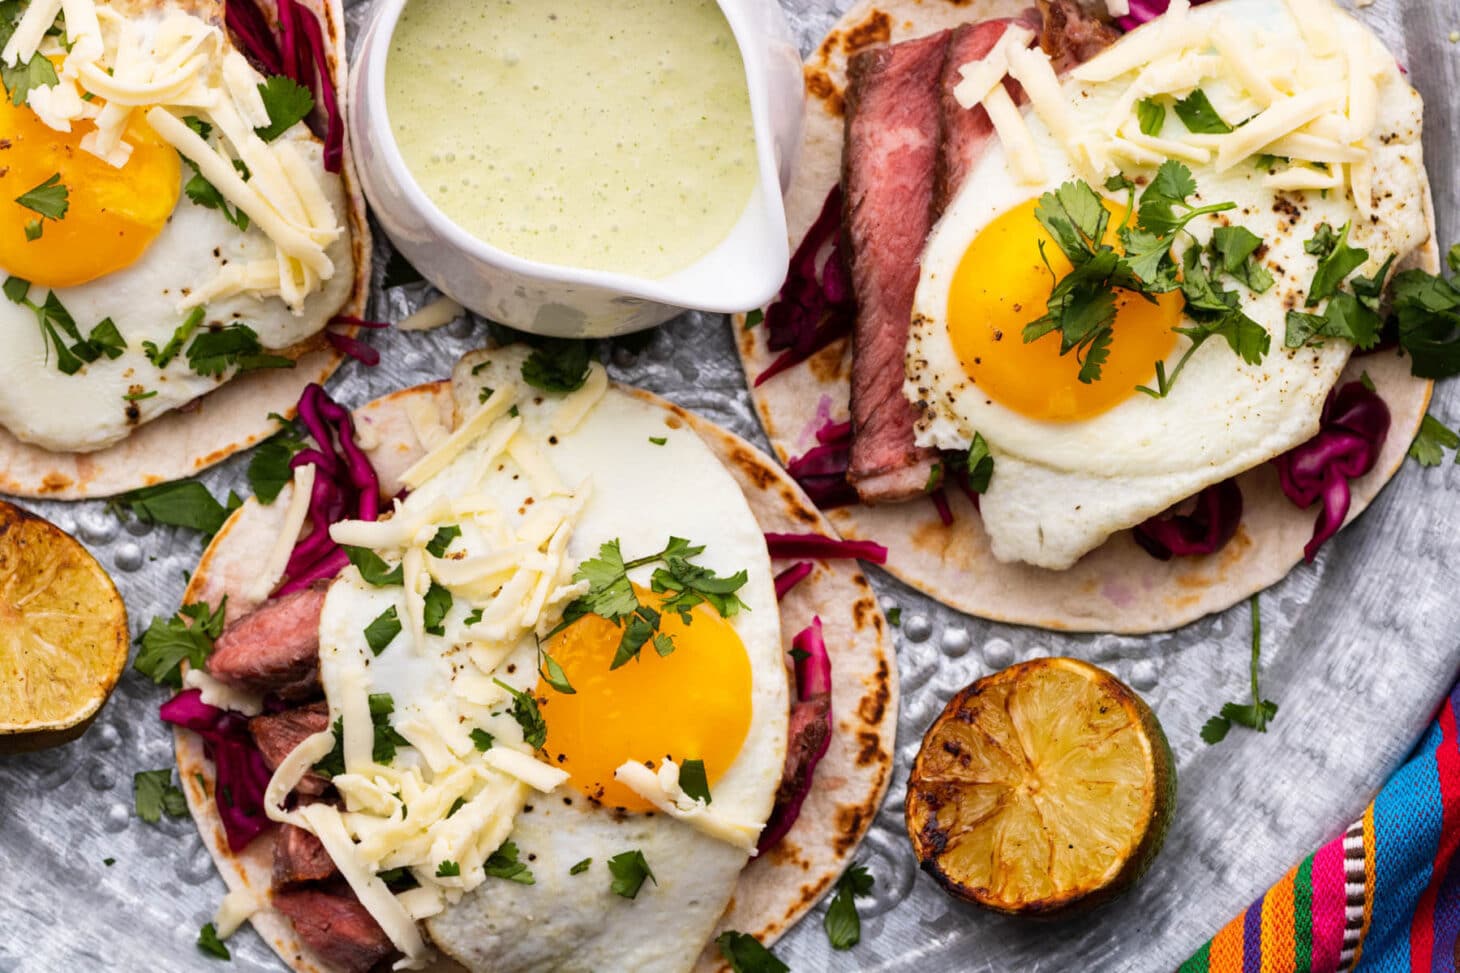 Grilled steak and egg tacos with sauce and limes.